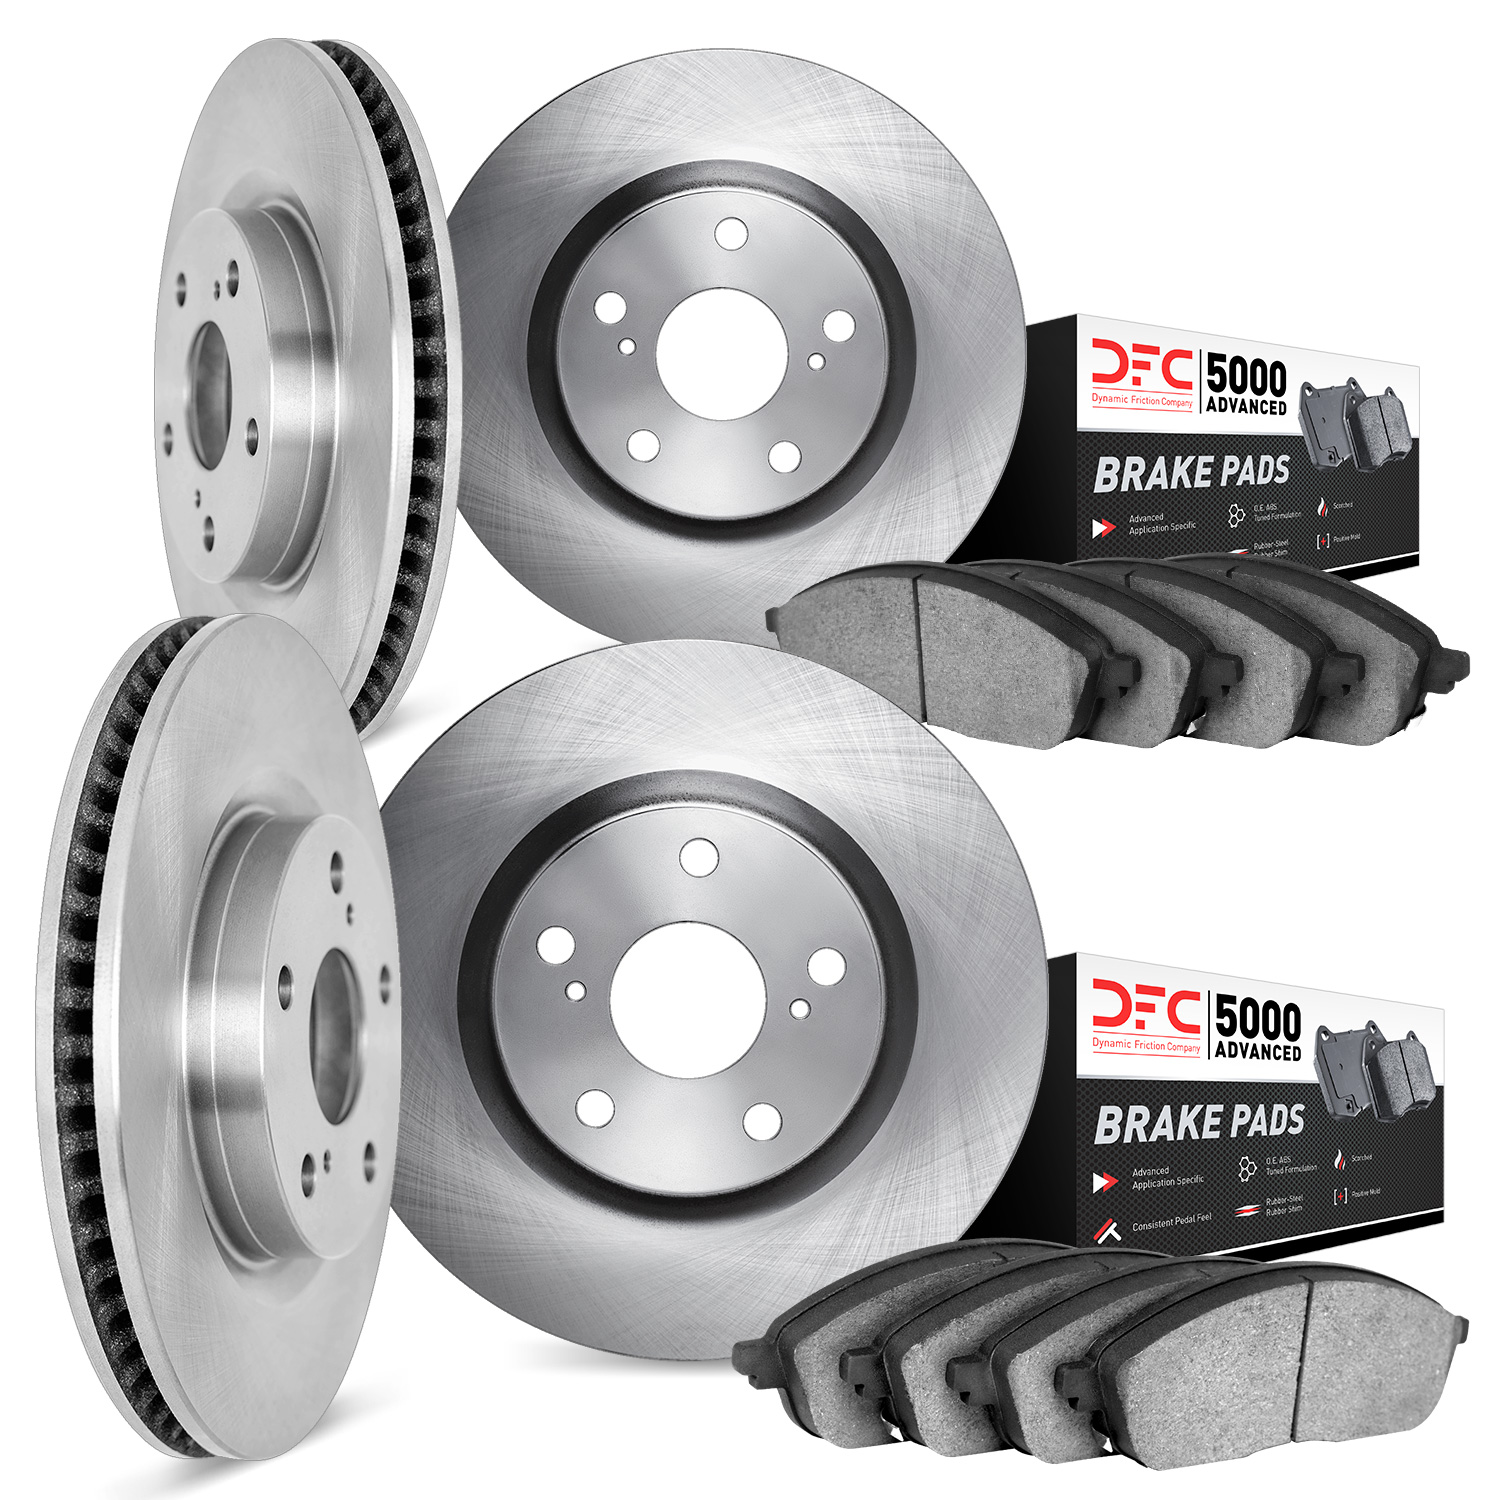 6504-73043 Brake Rotors w/5000 Advanced Brake Pads Kit, Fits Select Audi/Volkswagen, Position: Front and Rear